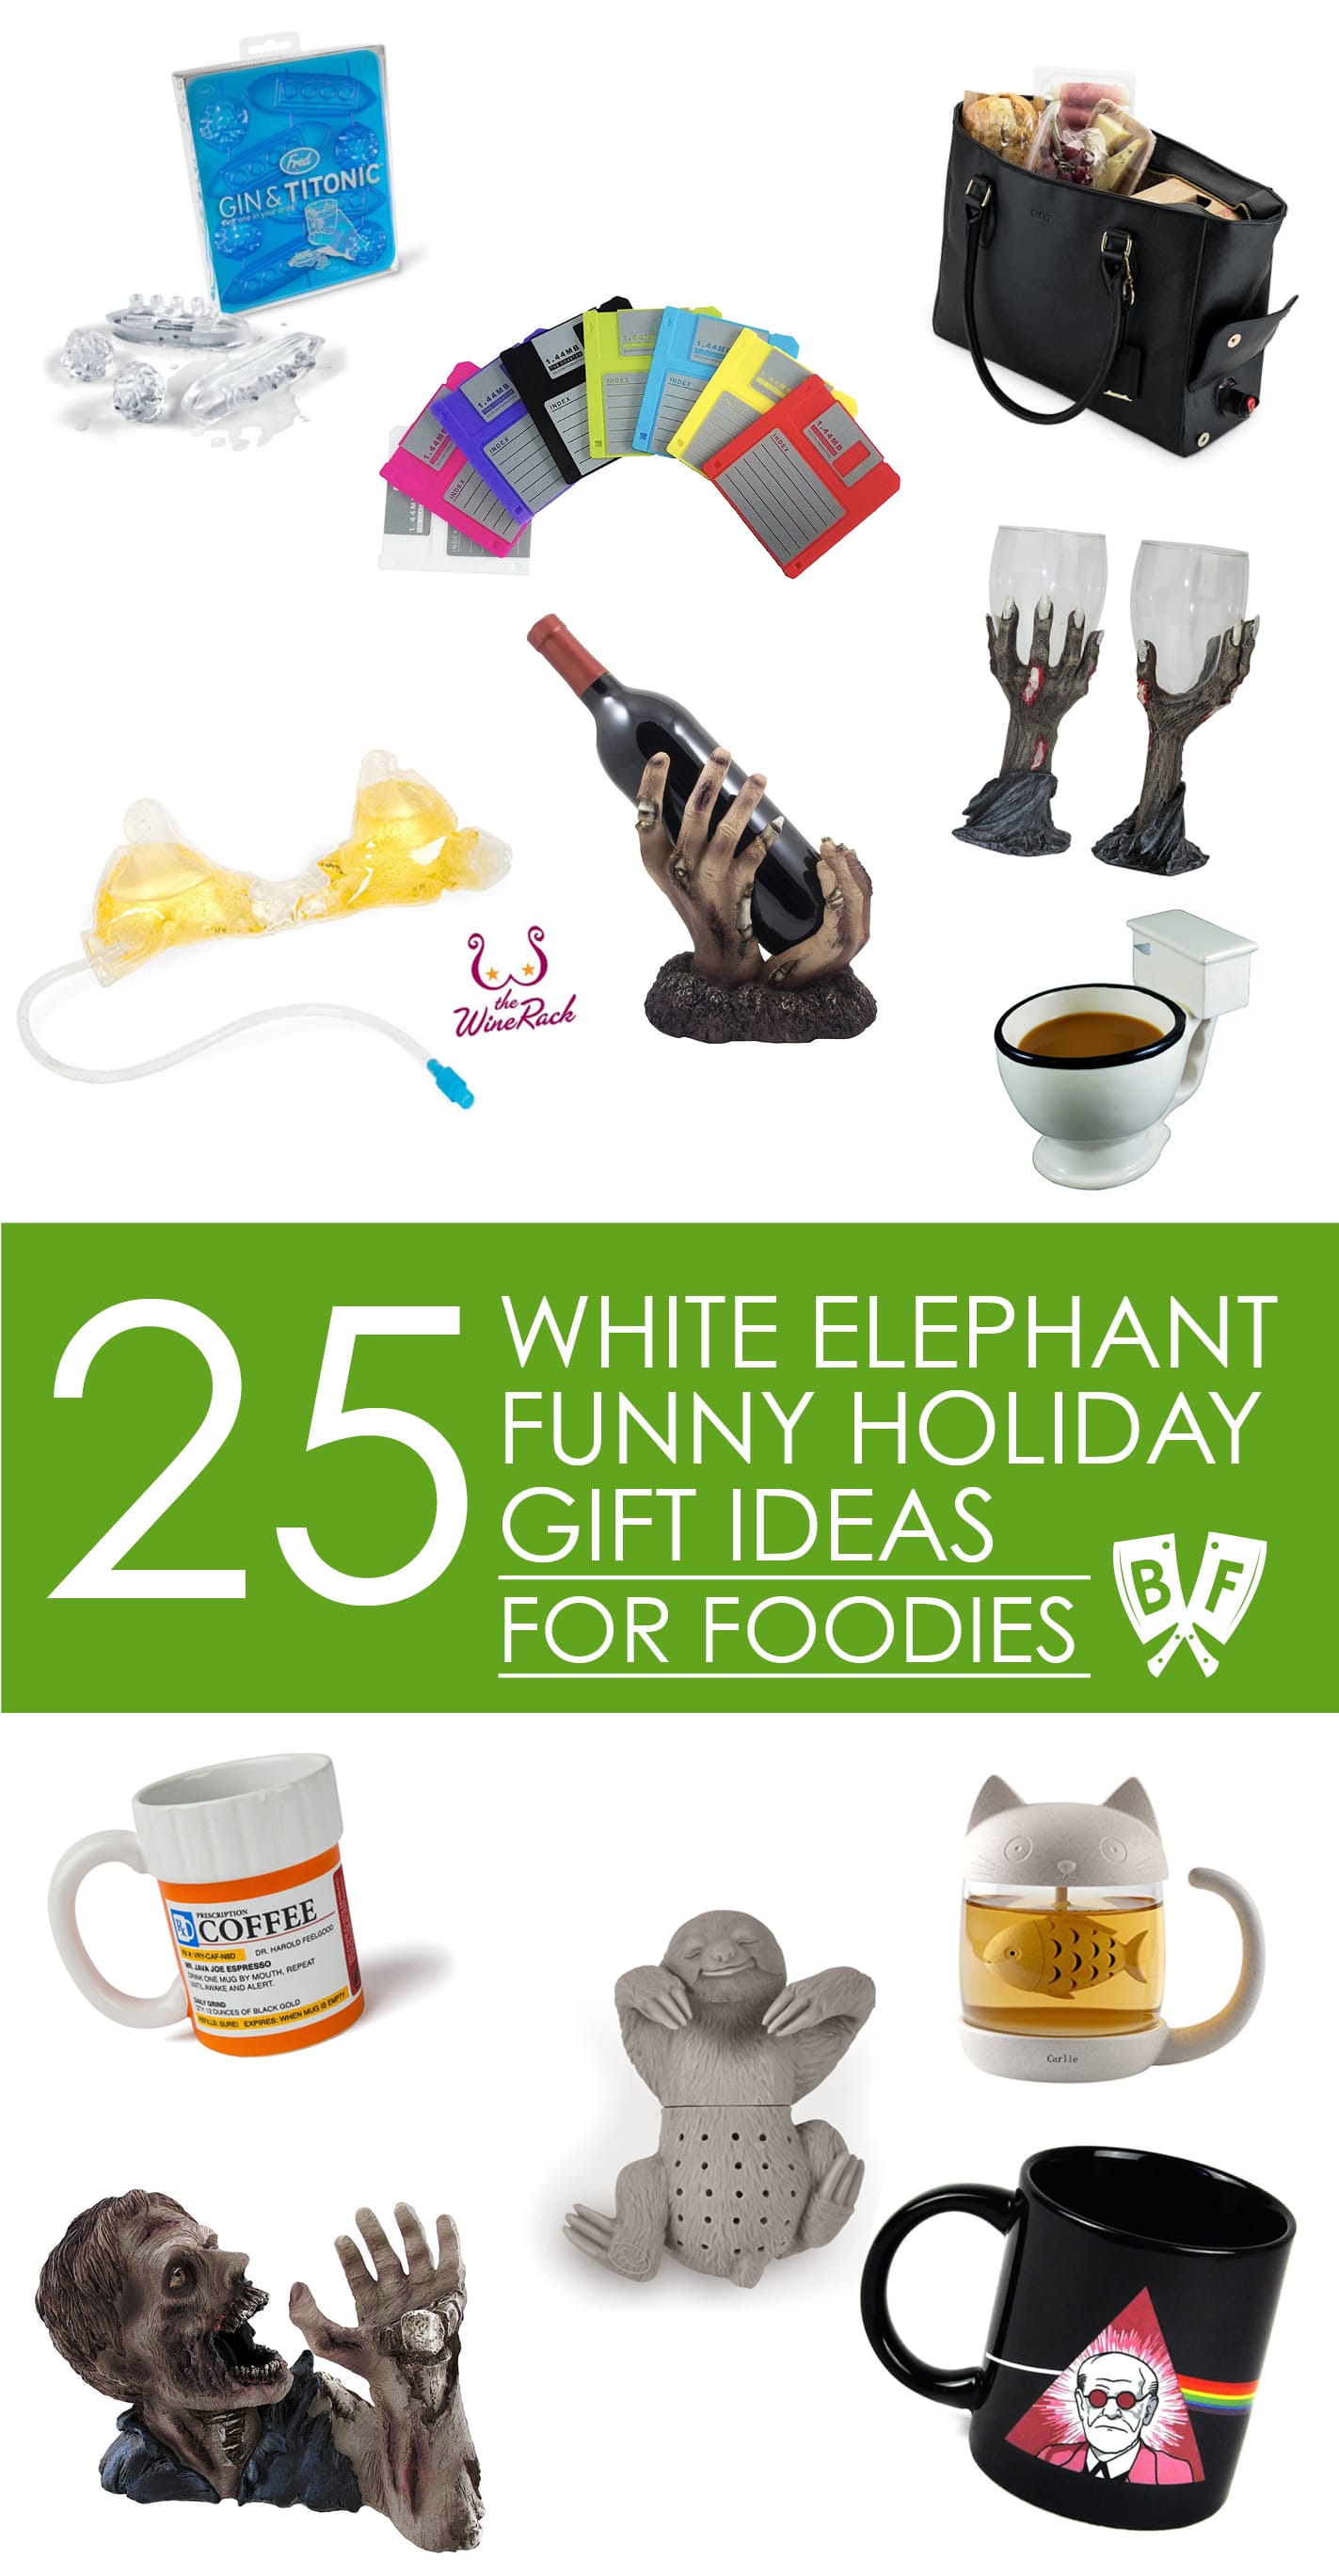 White Elephant Funny Holiday Gift Ideas for Foodies: Looking for funny stocking stuffers + holiday gift ideas for the food lovers in your life? This collection of 25 food + drink items is sure to be a hit!